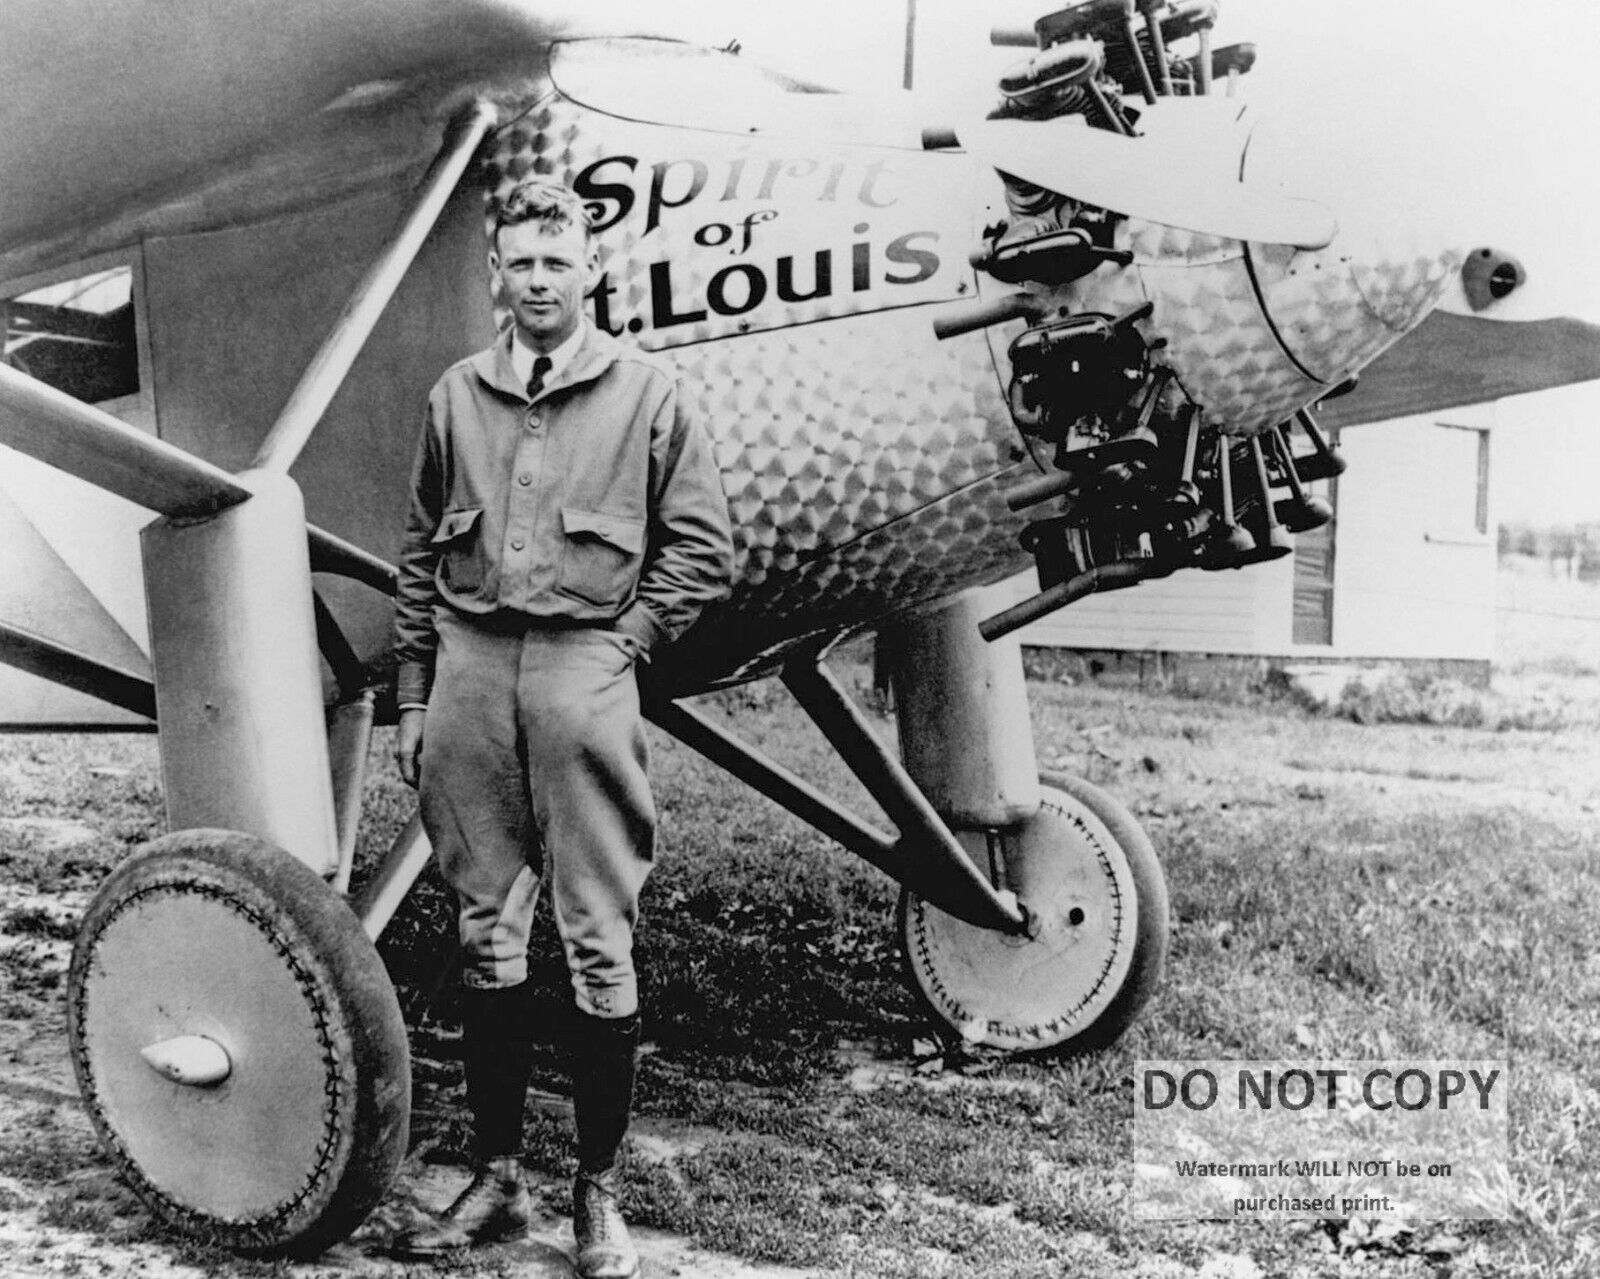 CHARLES LINDBERGH IN FRONT OF PLANE \